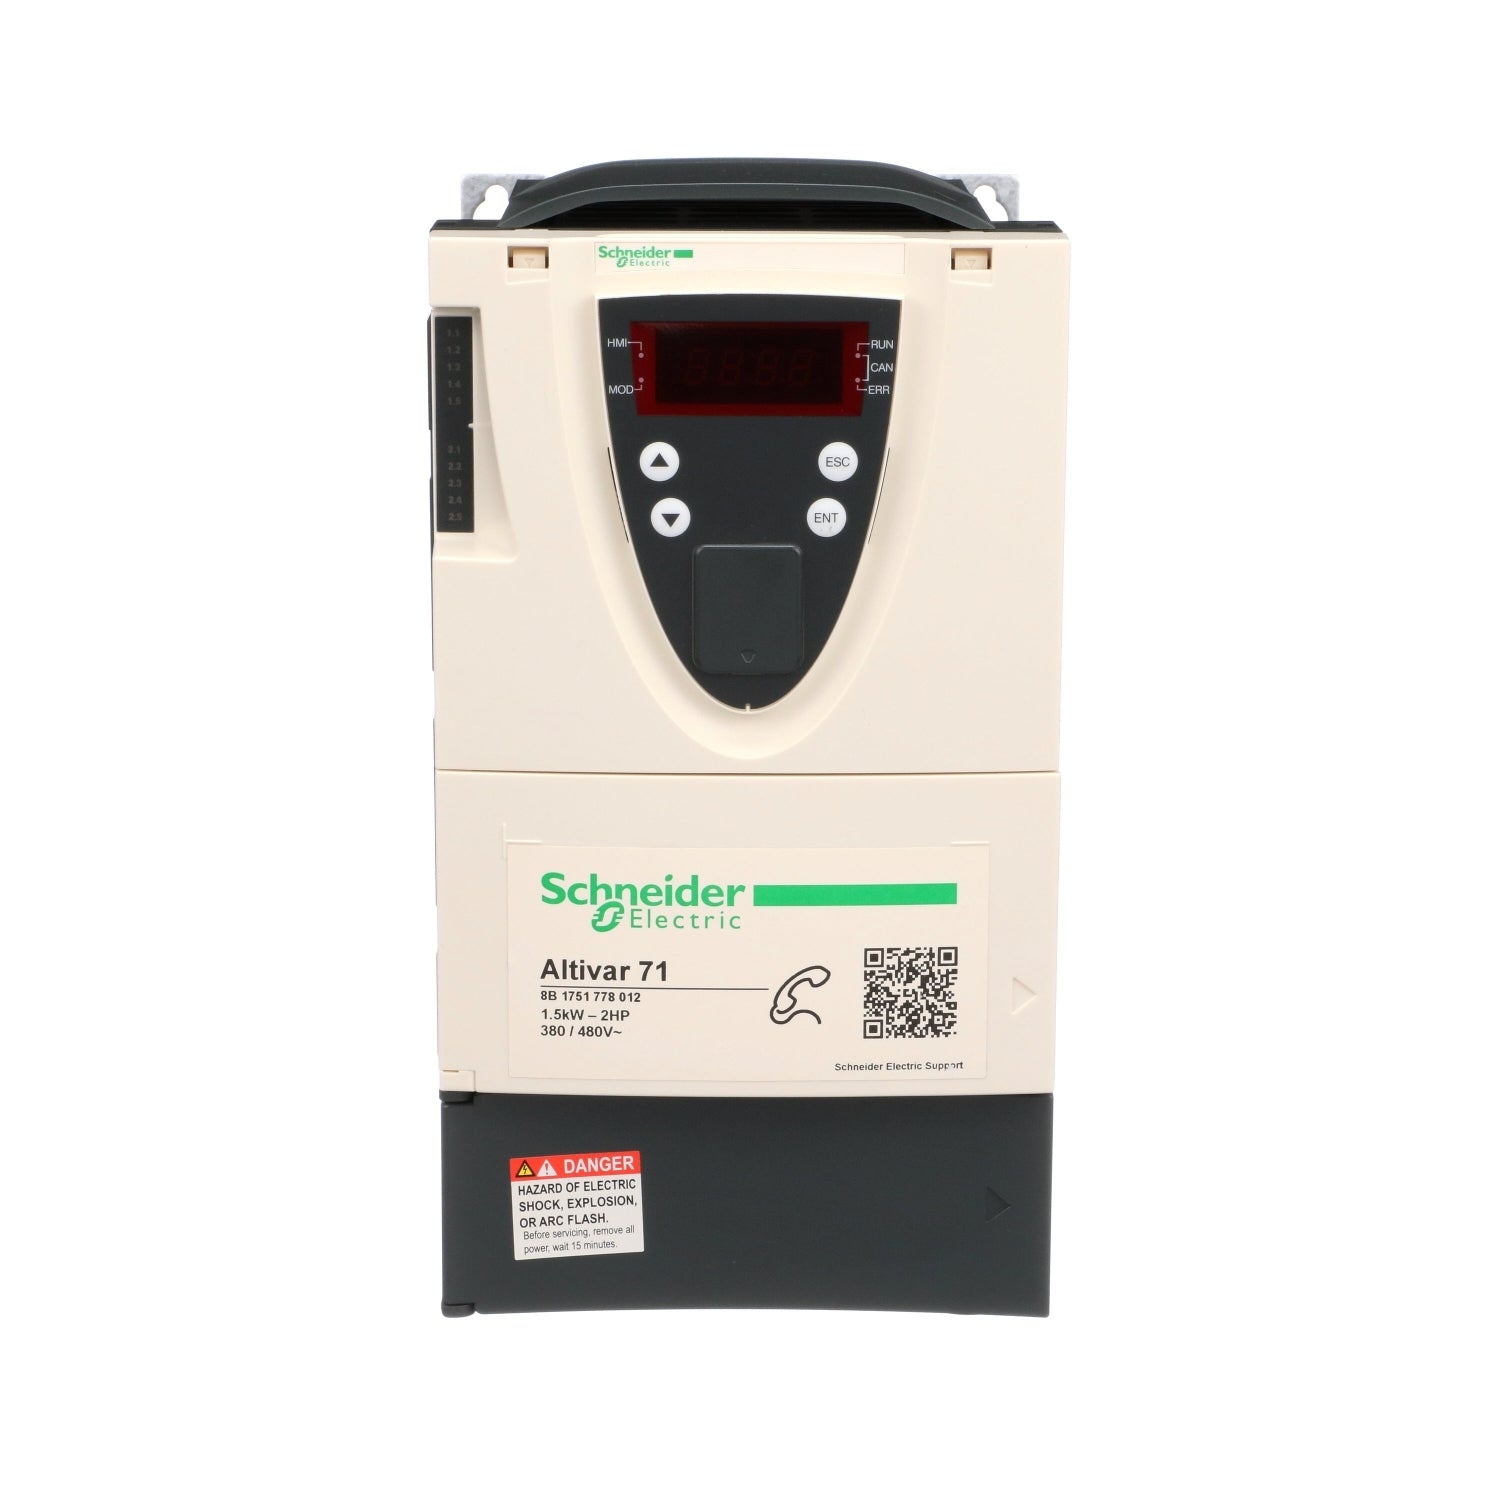 ATV71HU15N4Z | Schneider Electric | Variable speed drive, ATV71, 1.5kW, 2HP, 380 to 480V, 43dB, EMC filter, without graphic terminal, CANopen, Modbus